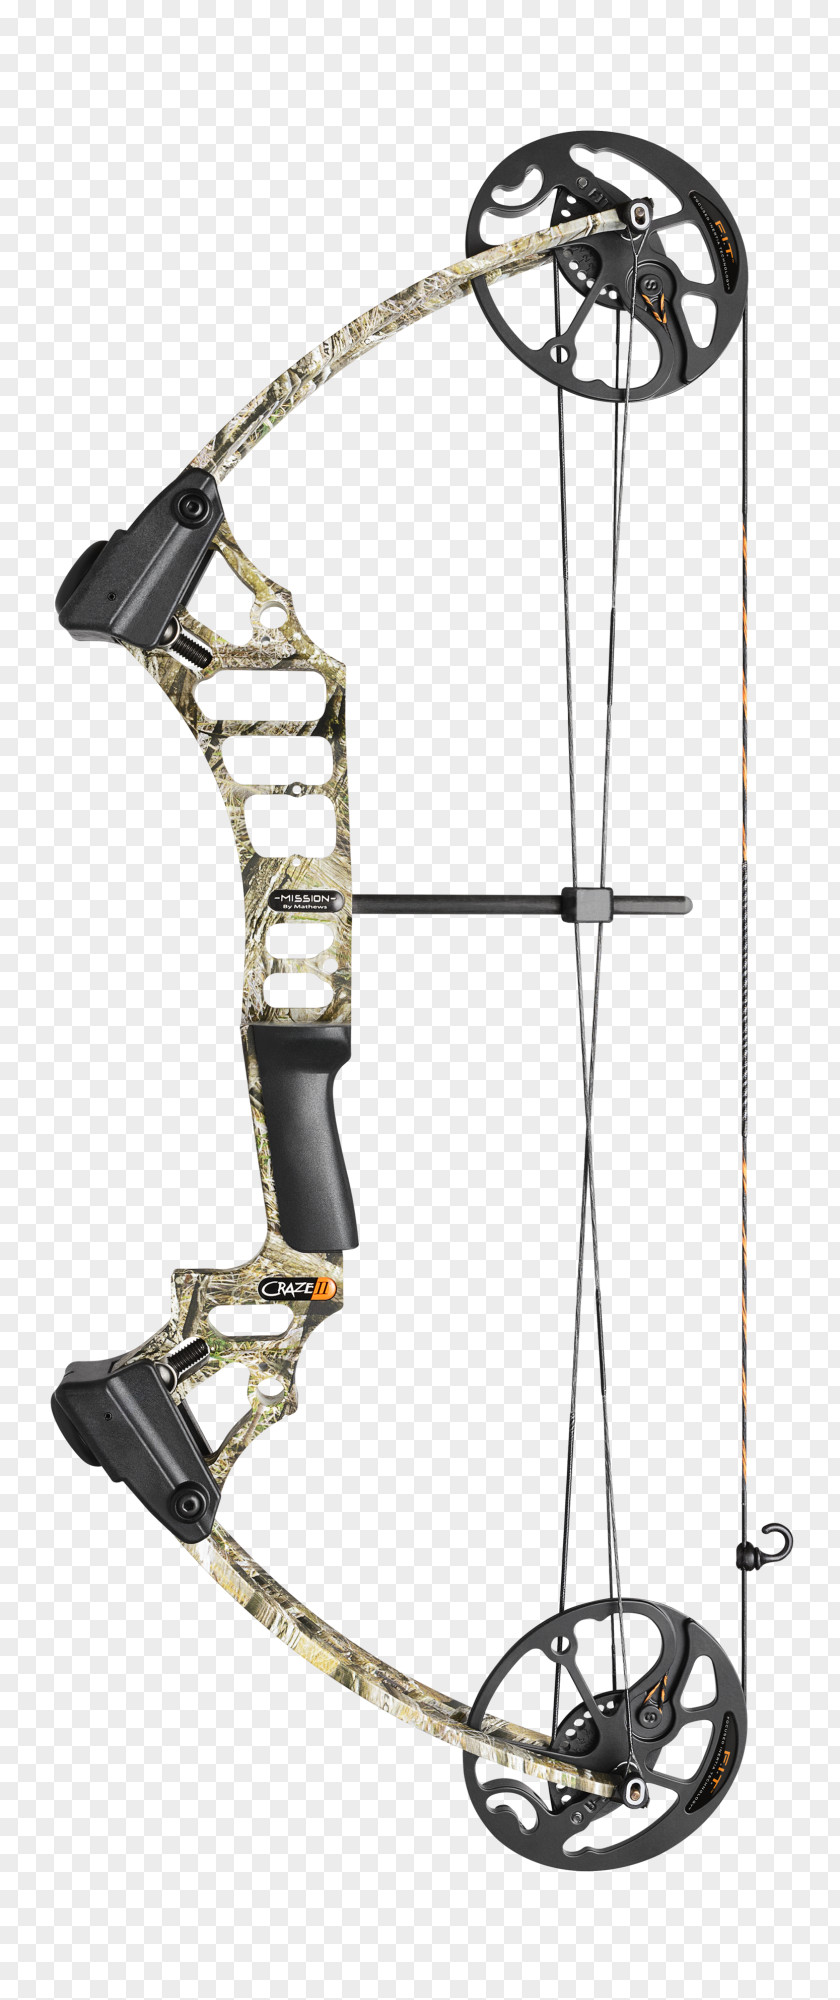 Web Shop Archery Bow And Arrow Compound Bows Bowhunting PNG